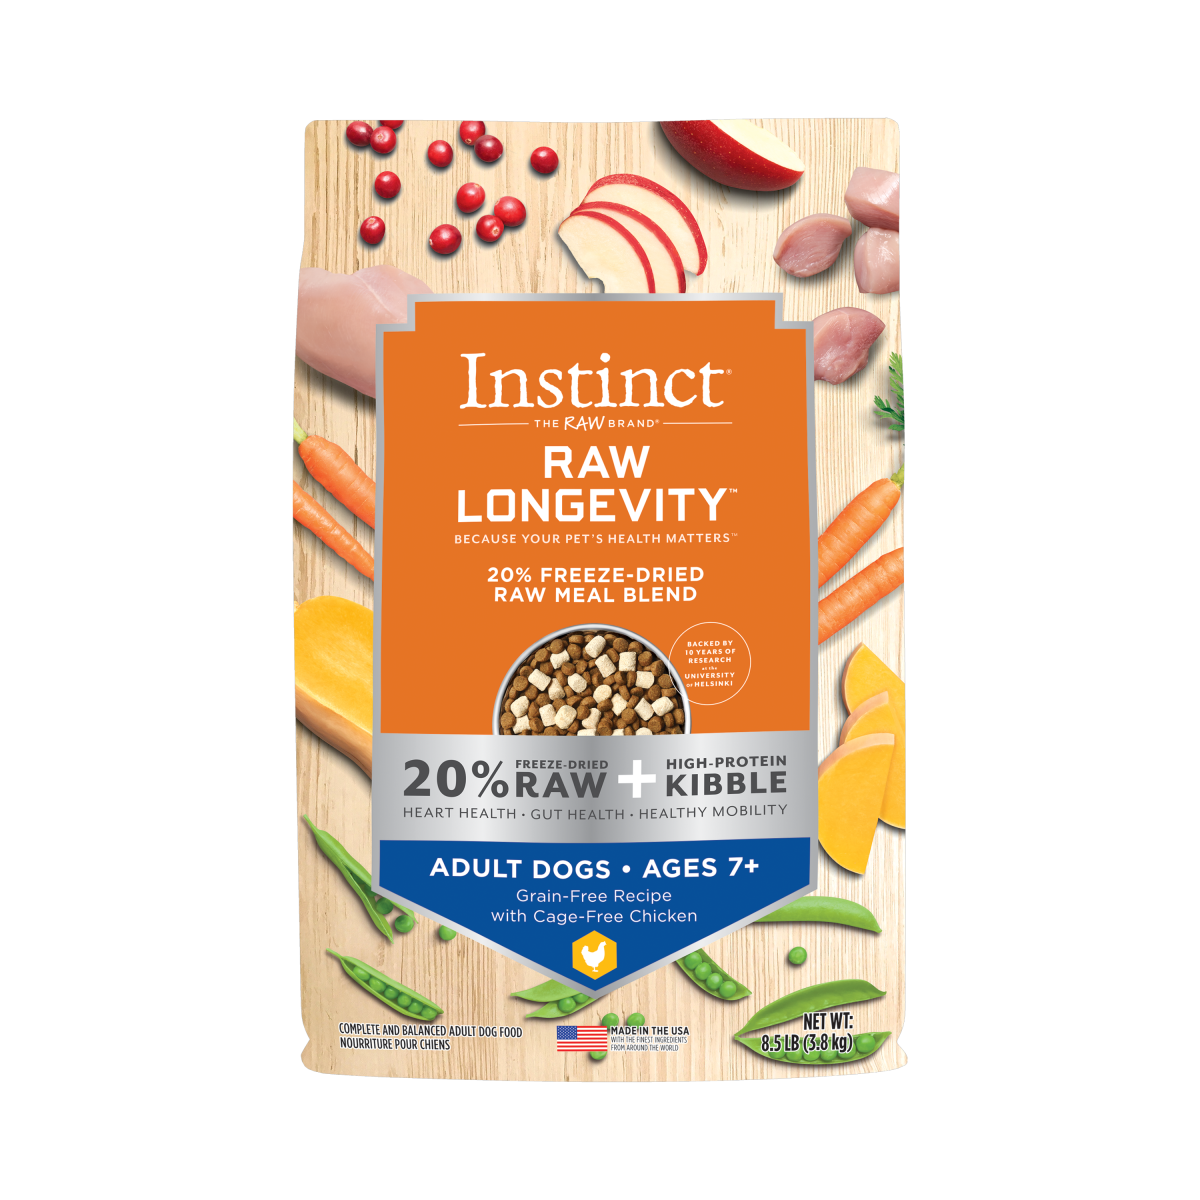 Instinct - Raw Longevity 20% Freeze-Dried Raw Meal Blend Cage-Free Chicken Recipe (For Adults 7+)